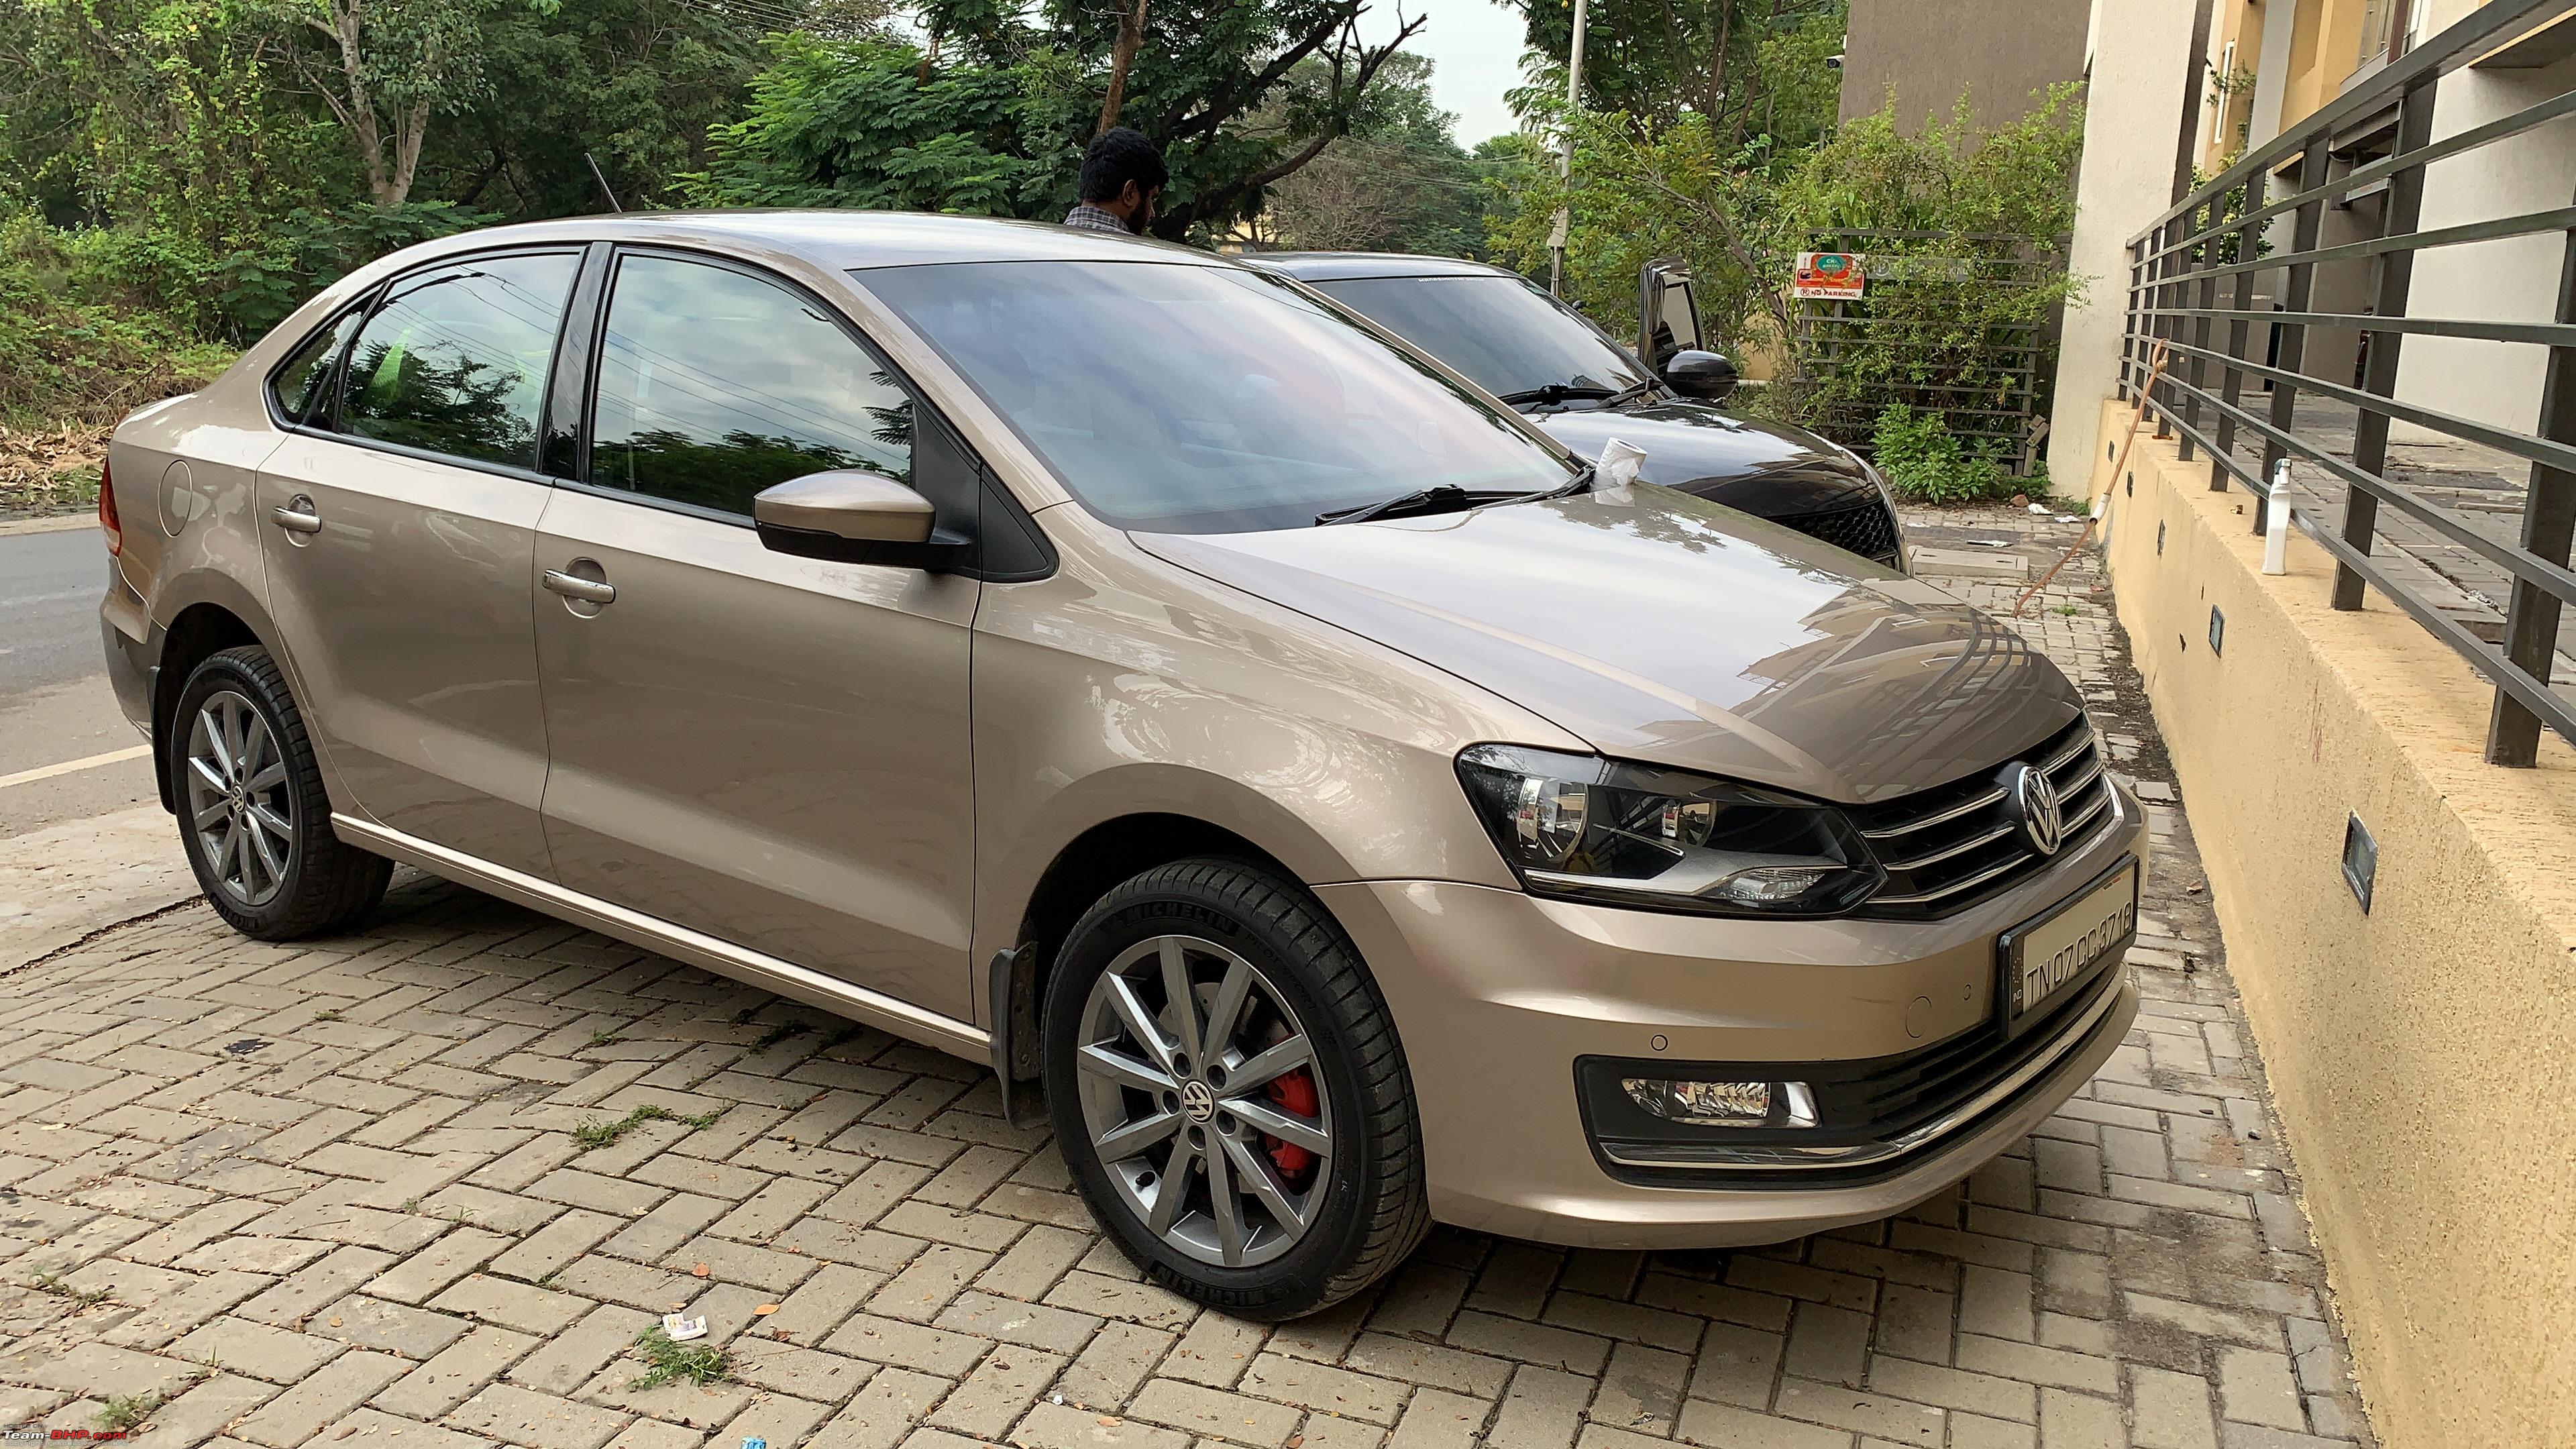 Ledig Panorama Stige Volkswagen Vento TSI with mods & accessories – My institution for learning  - Page 3 - Team-BHP